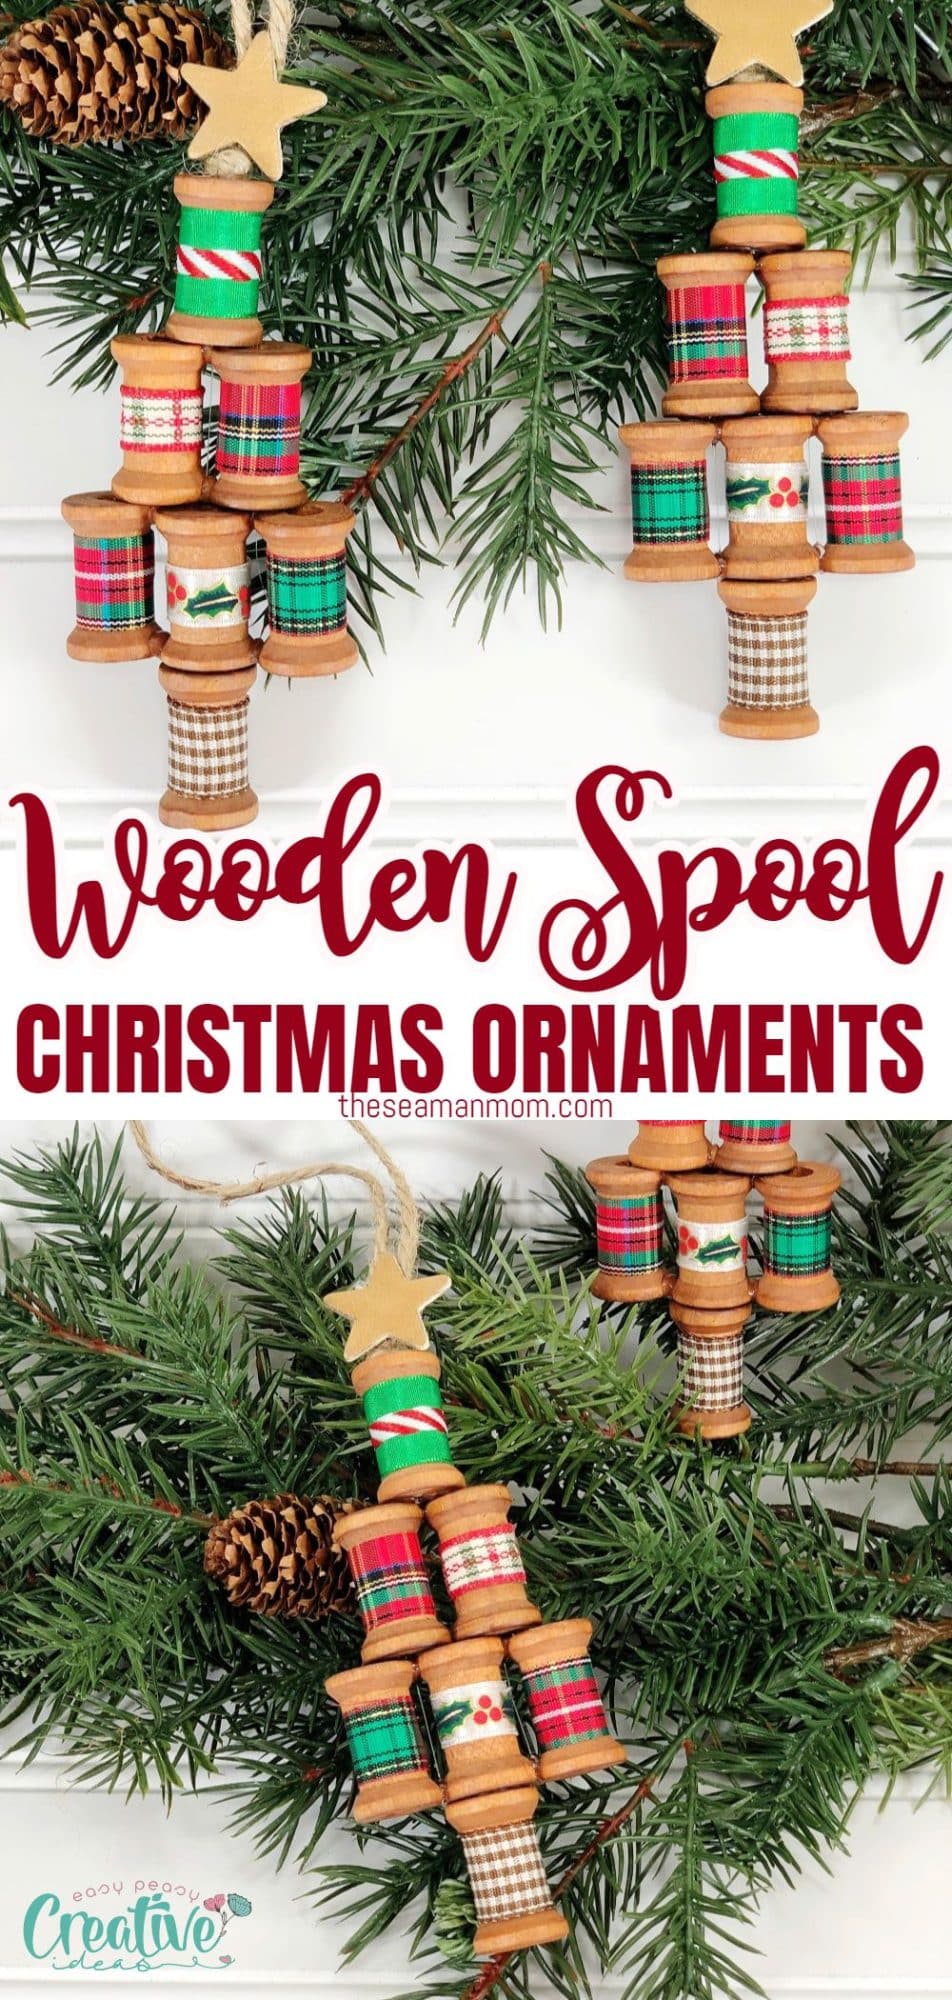 Photo collage of wooden spool Christmas ornaments in a Christmas tree